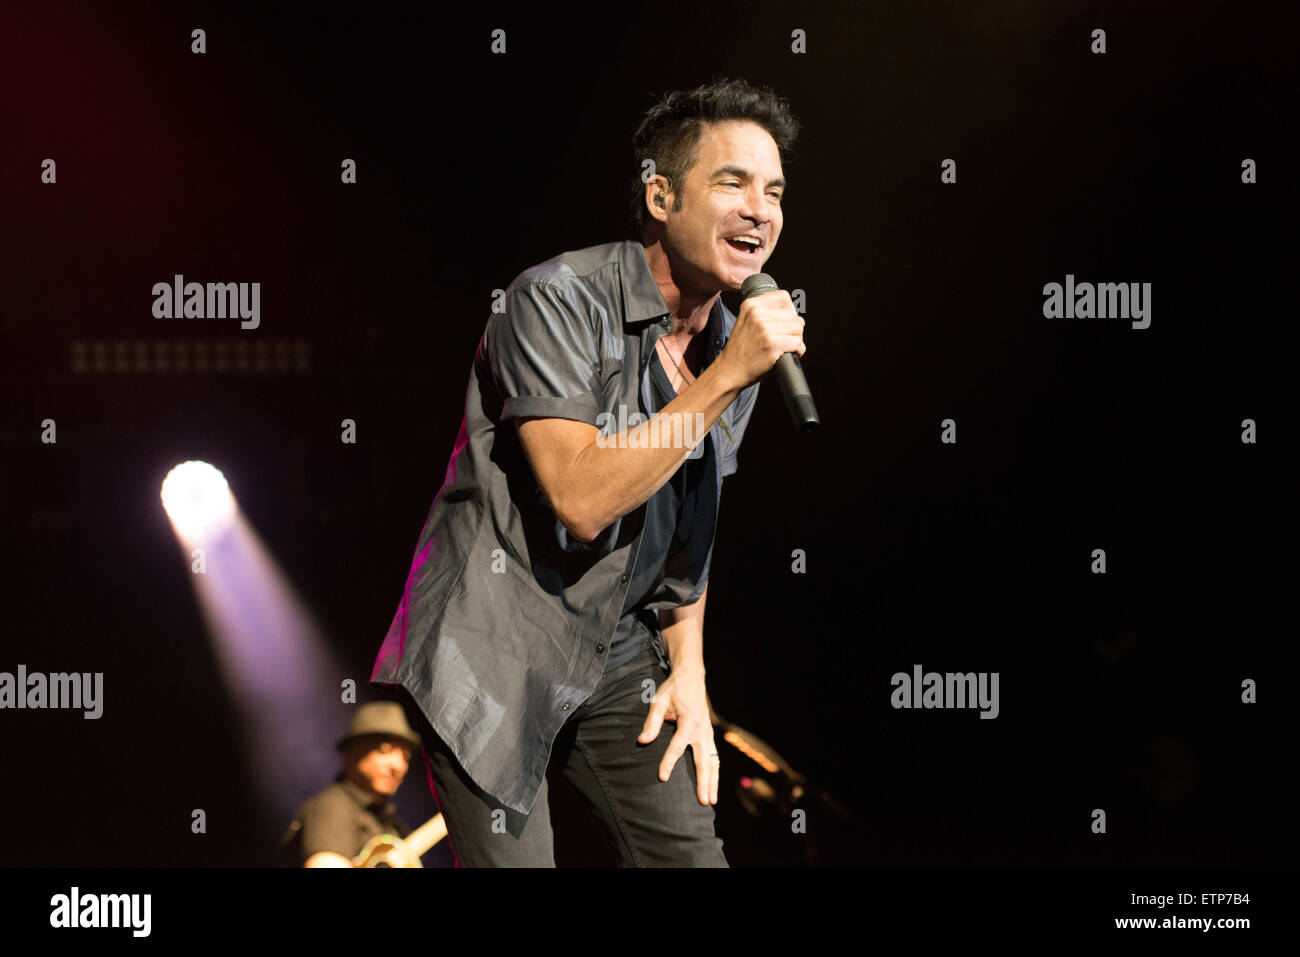 Camden, New Jersey, USA. 14th June, 2015. PAT MONAHAN, lead singer of the band TRAIN, performing at the Susquehanna Bank Center as part of the Picasso at the Wheel Tour Credit:  Ricky Fitchett/ZUMA Wire/Alamy Live News Stock Photo